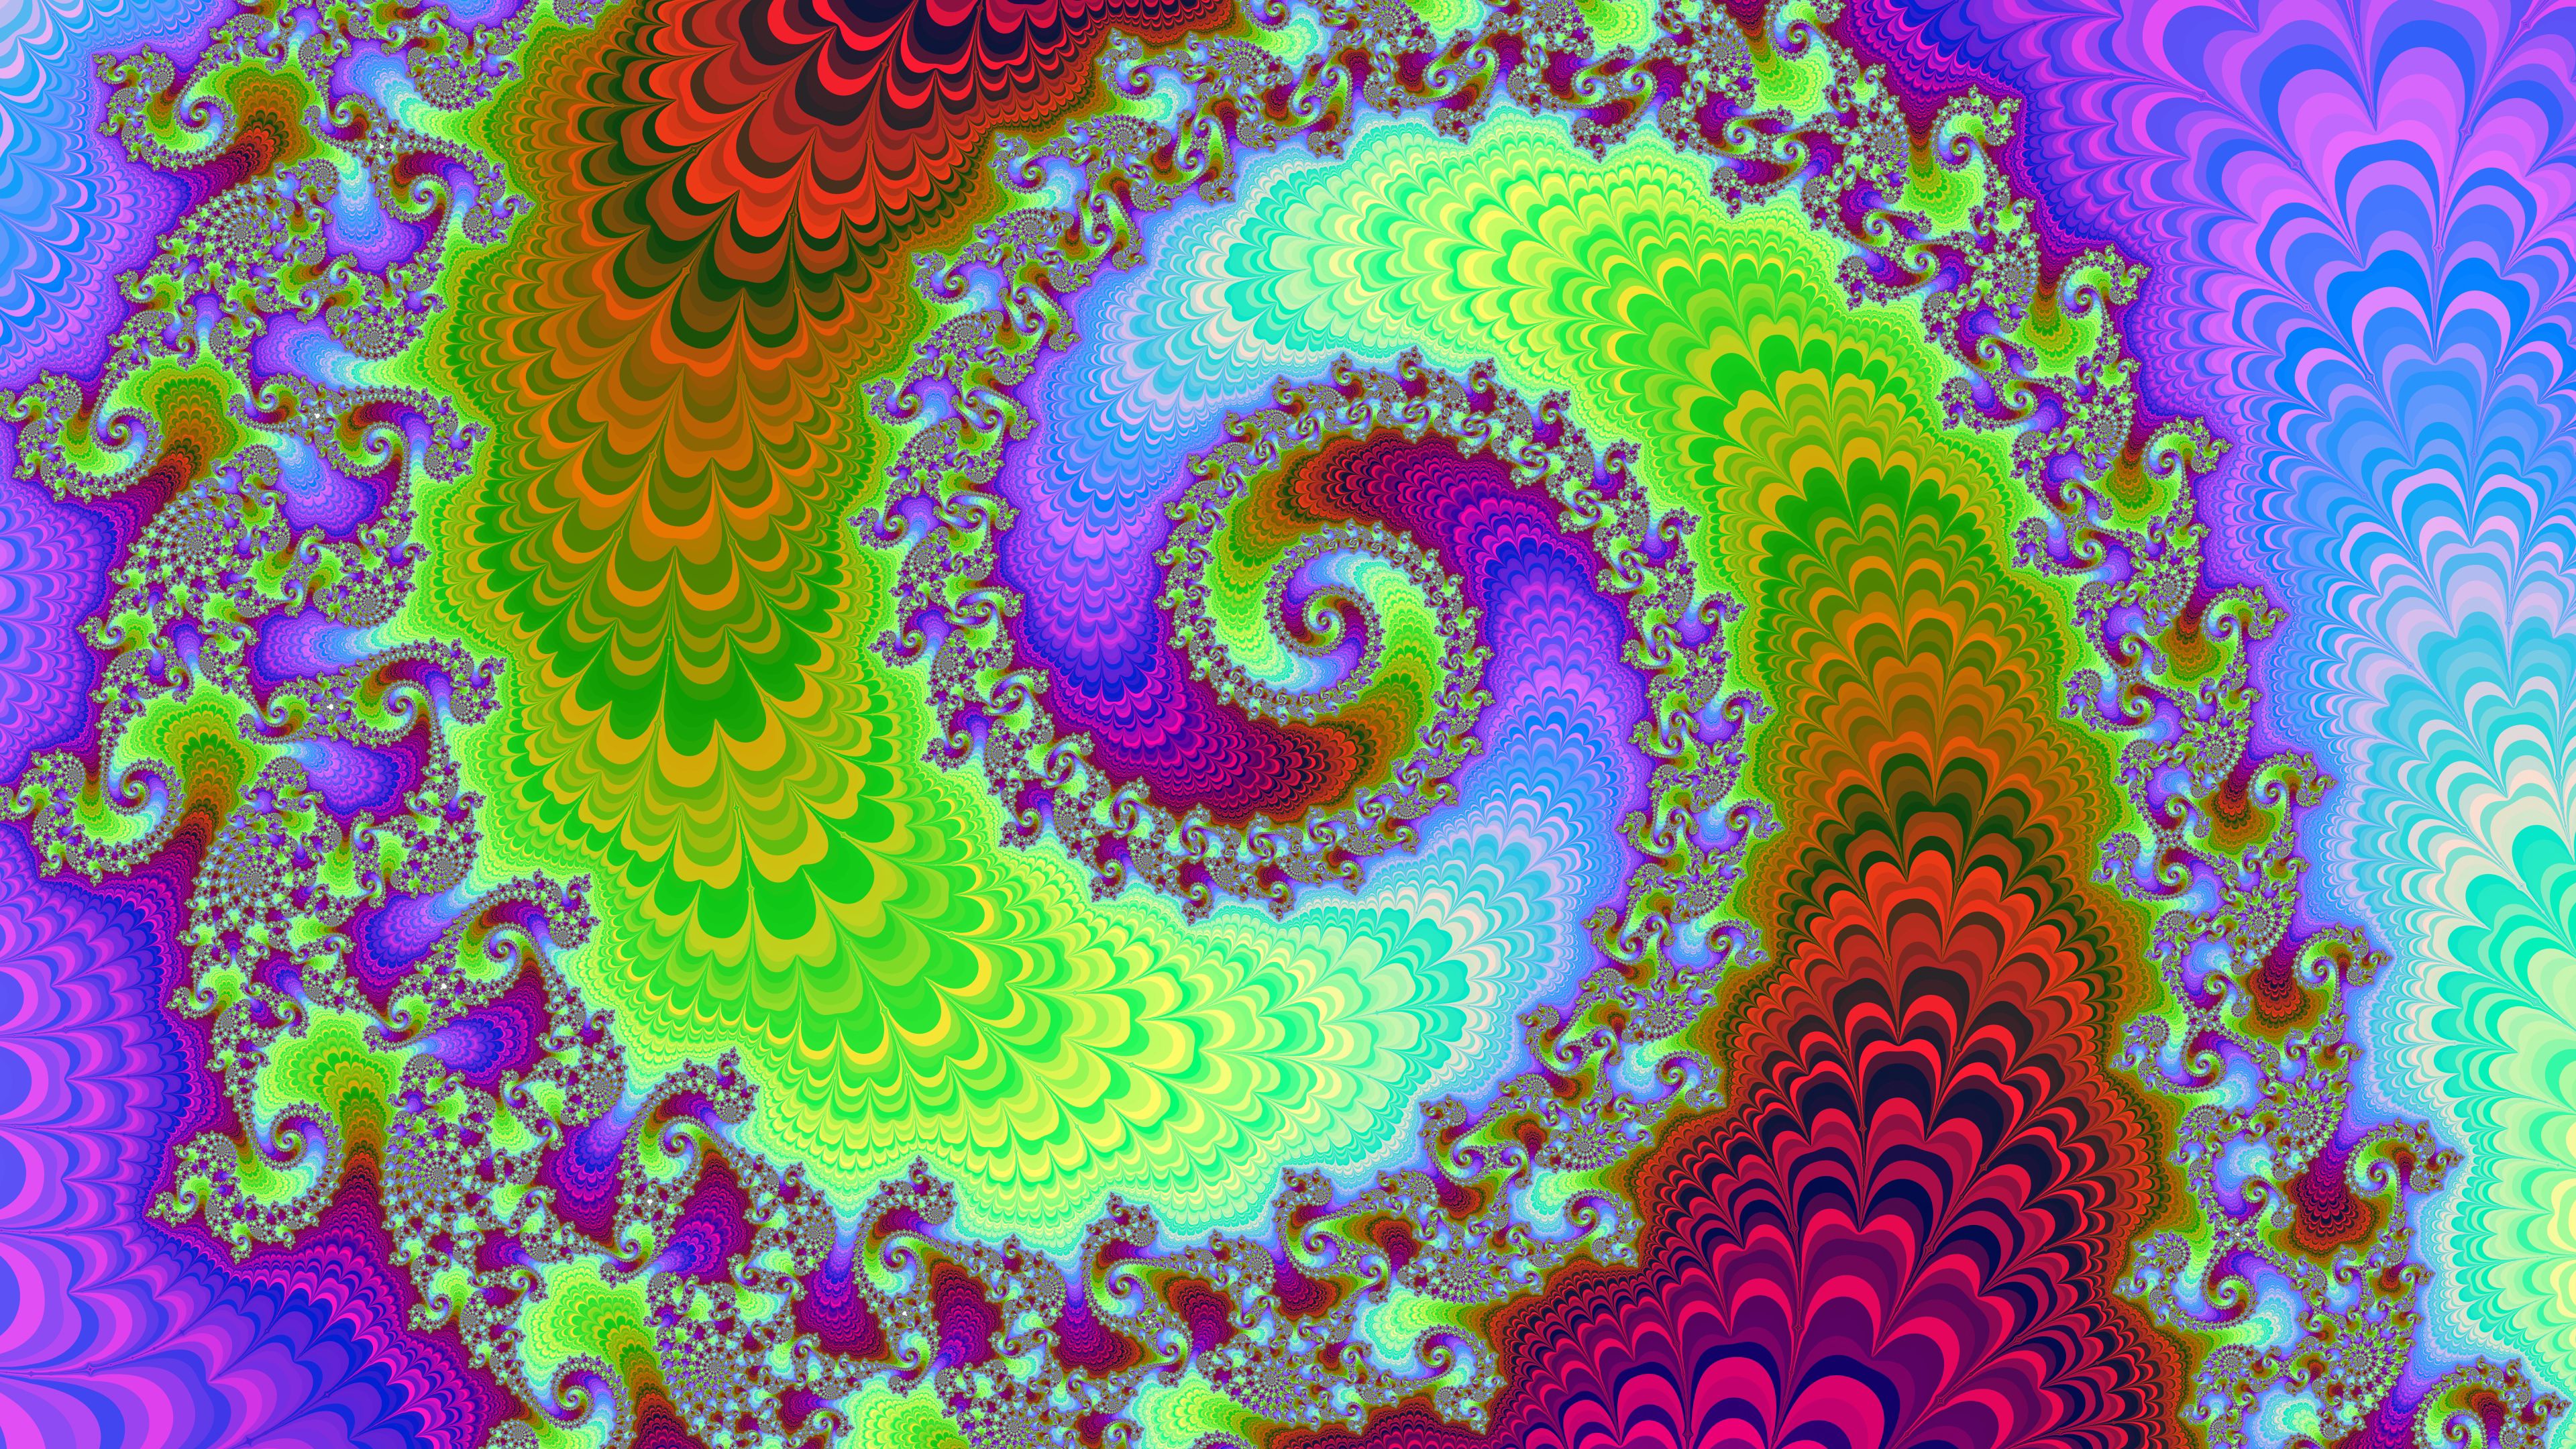 Download wallpaper 3840x2160 spiral, rotation, optical illusion,  multicolored 4k uhd 16:9 hd background